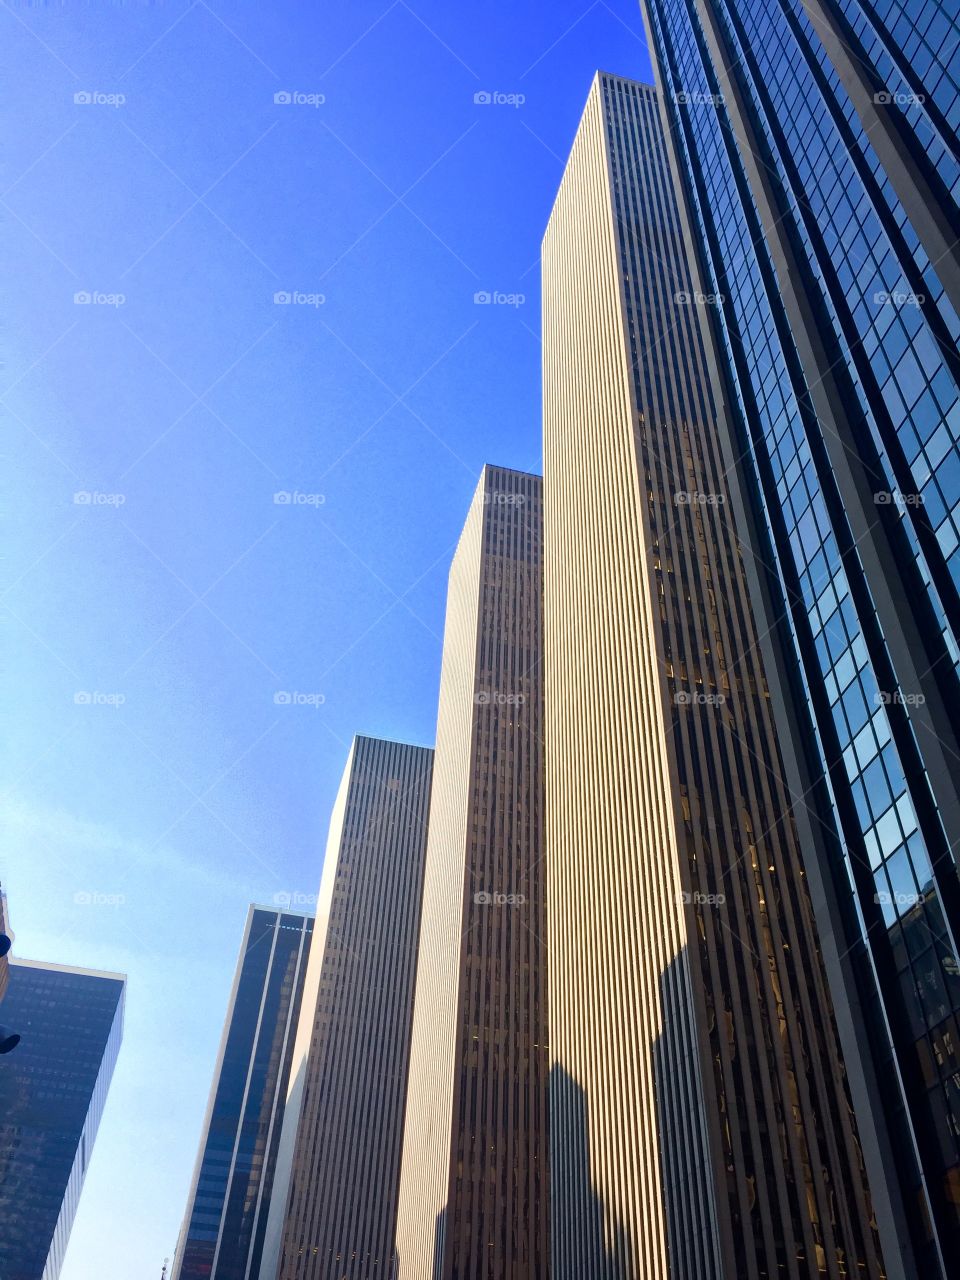 Architecture, Office, Skyscraper, Downtown, Business